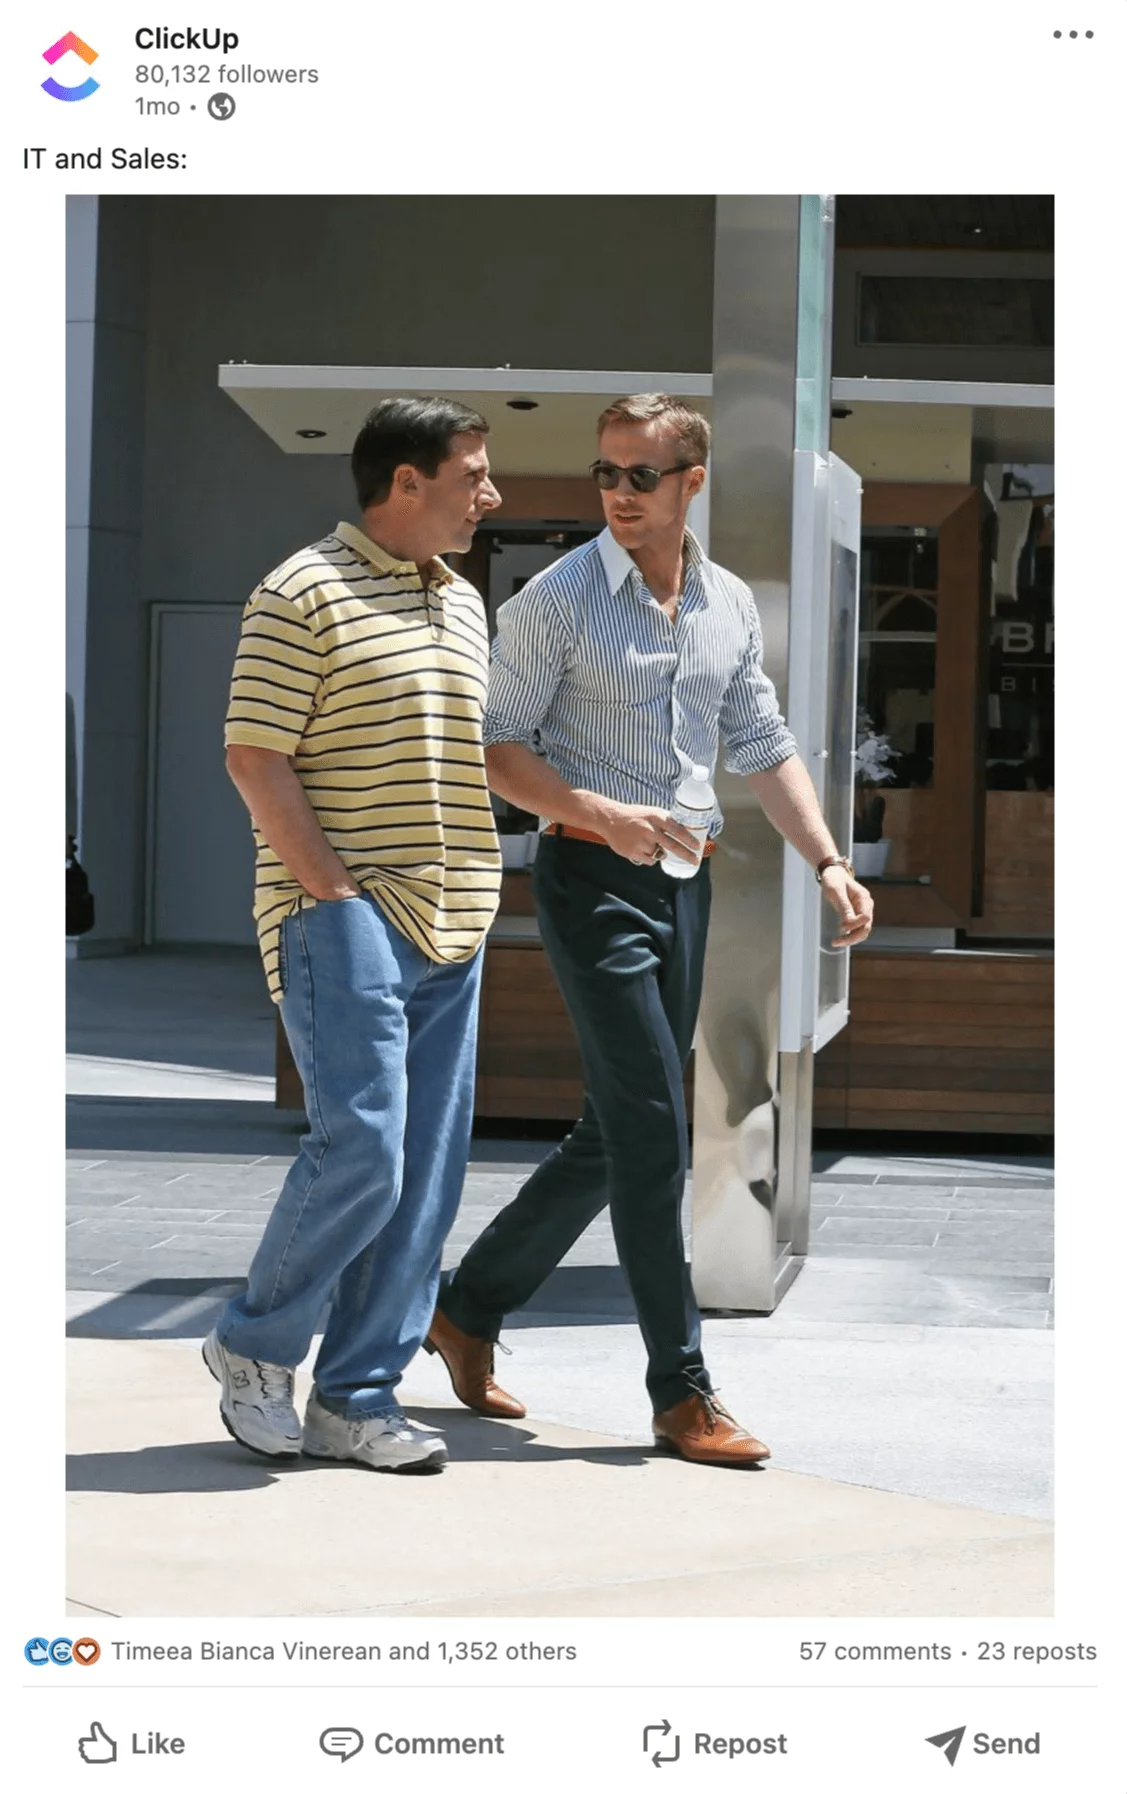 ClickUp's LinkedIn update showing a meme about IT and Sales using a photo of Ryan Gosling and Steve Carell.